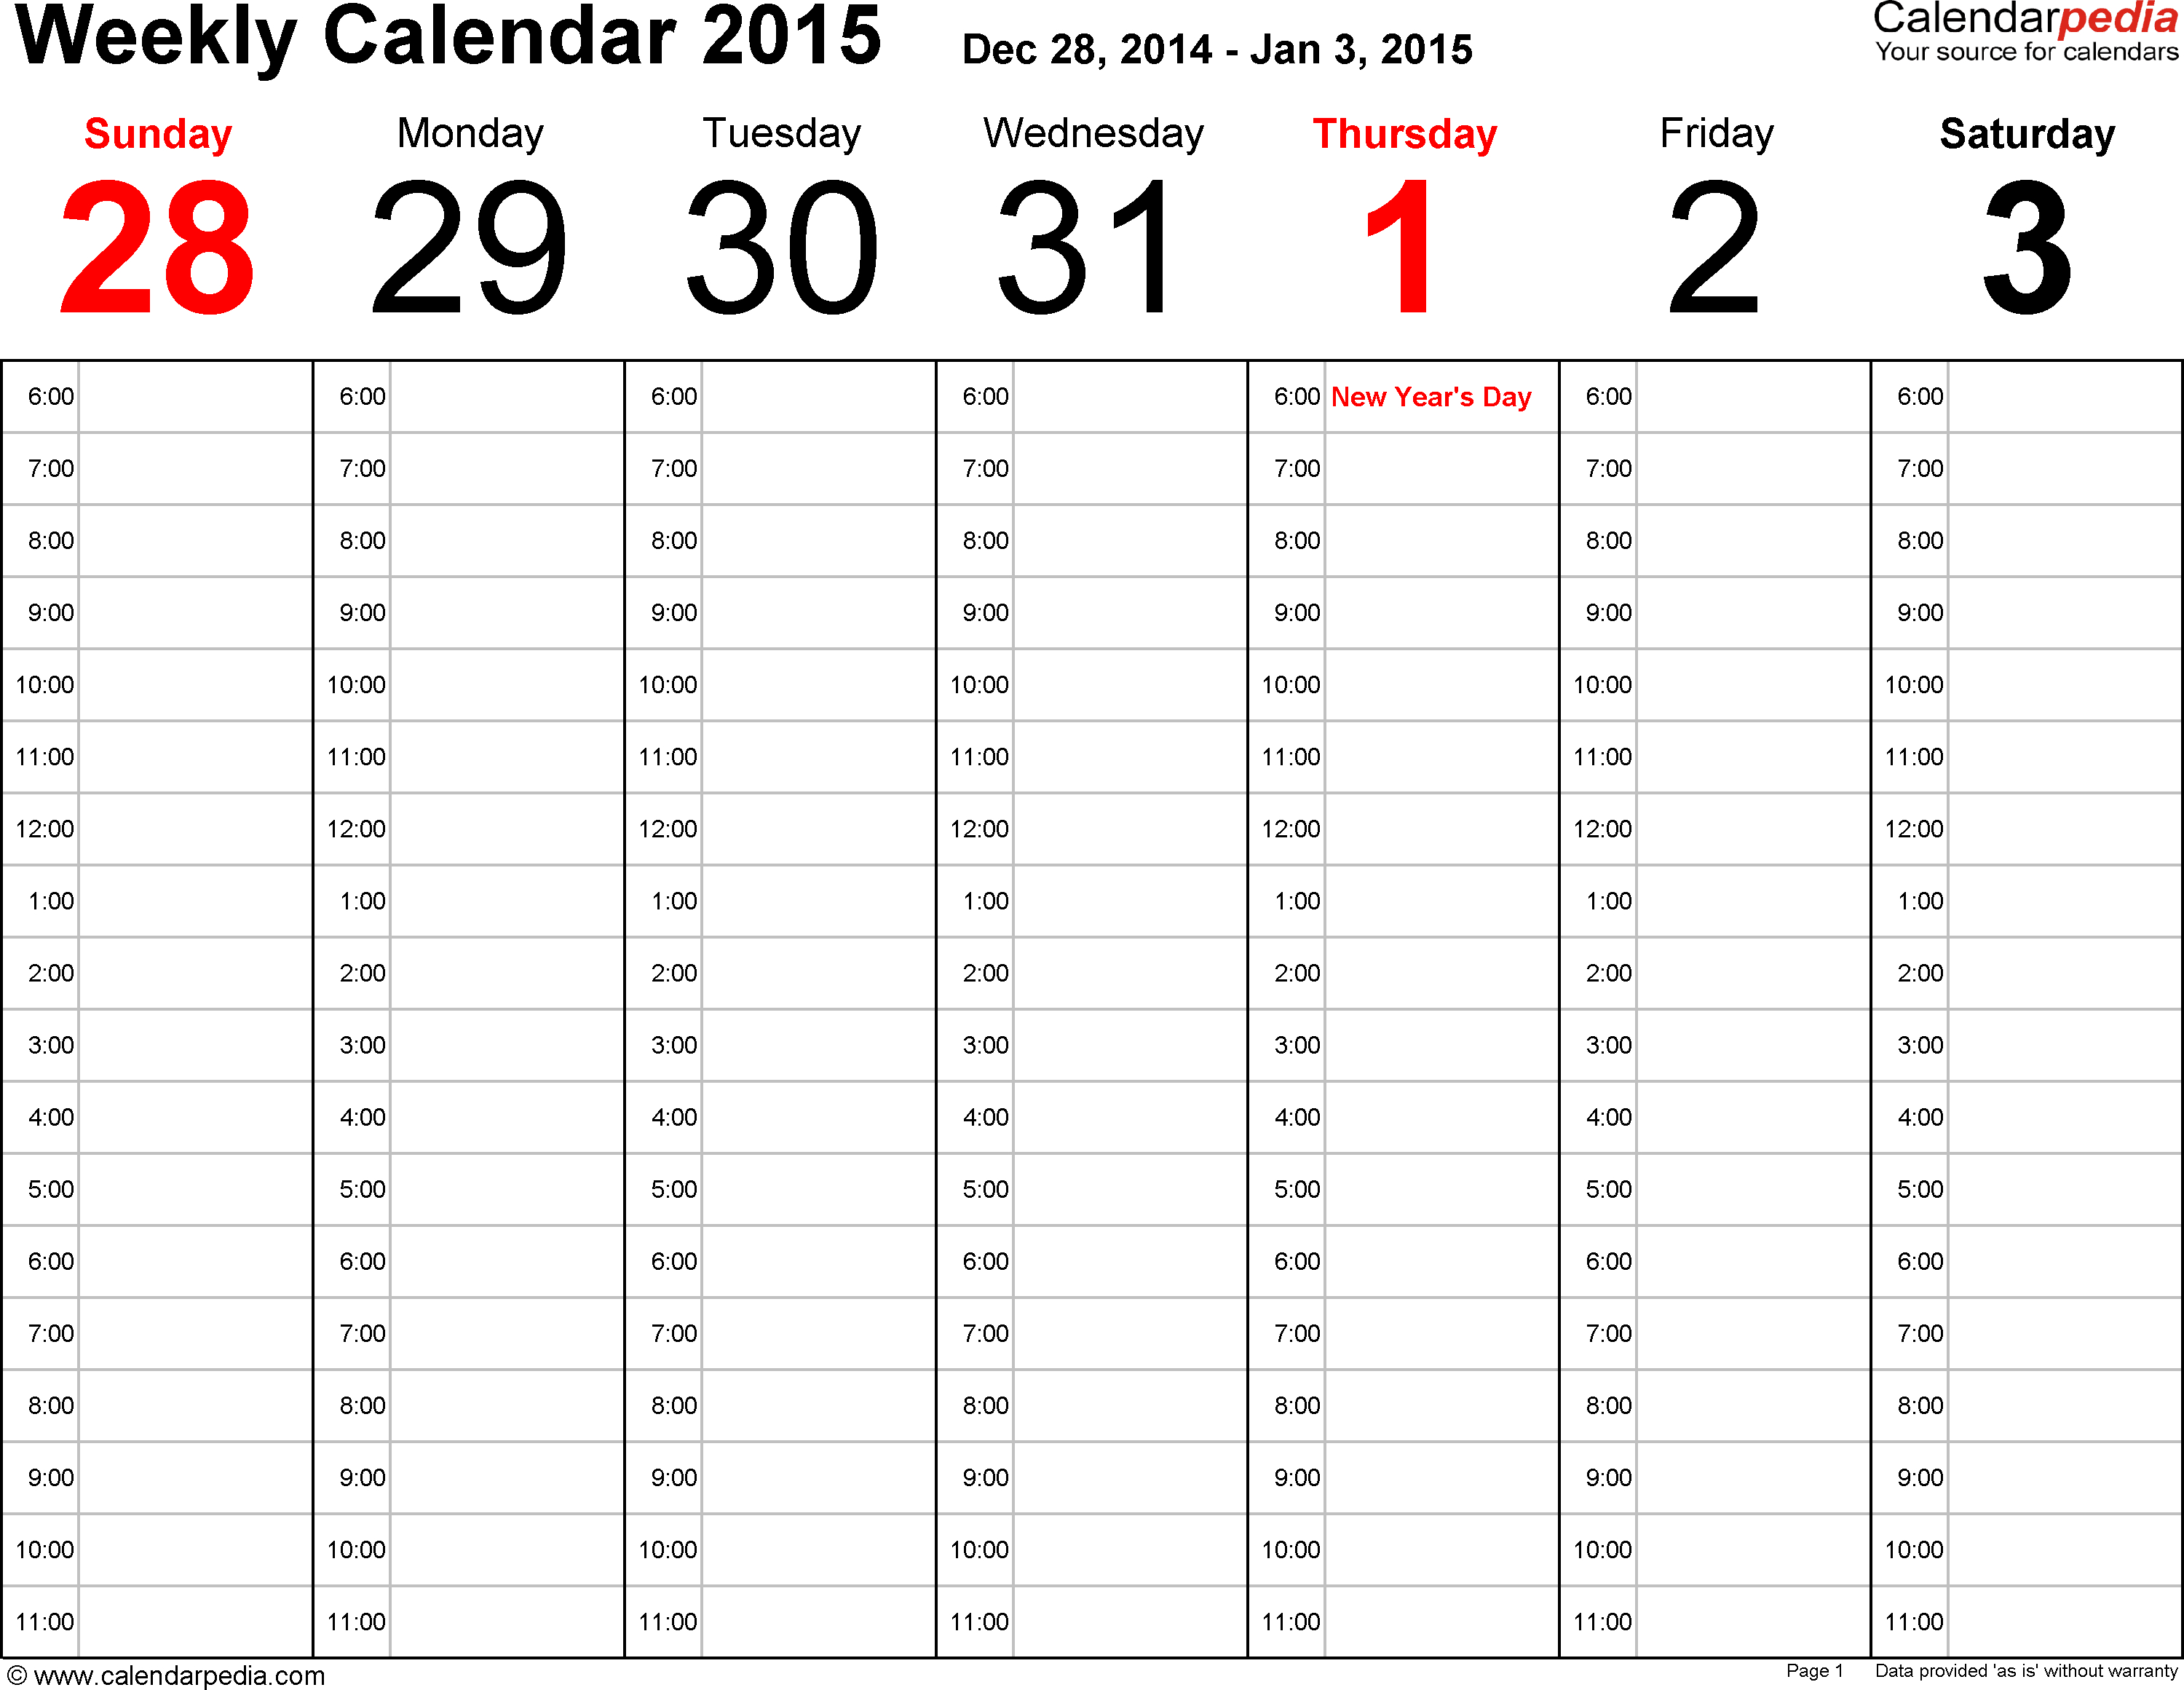 Weekly Calendar 2015 For Excel - 12 Free Printable Templates